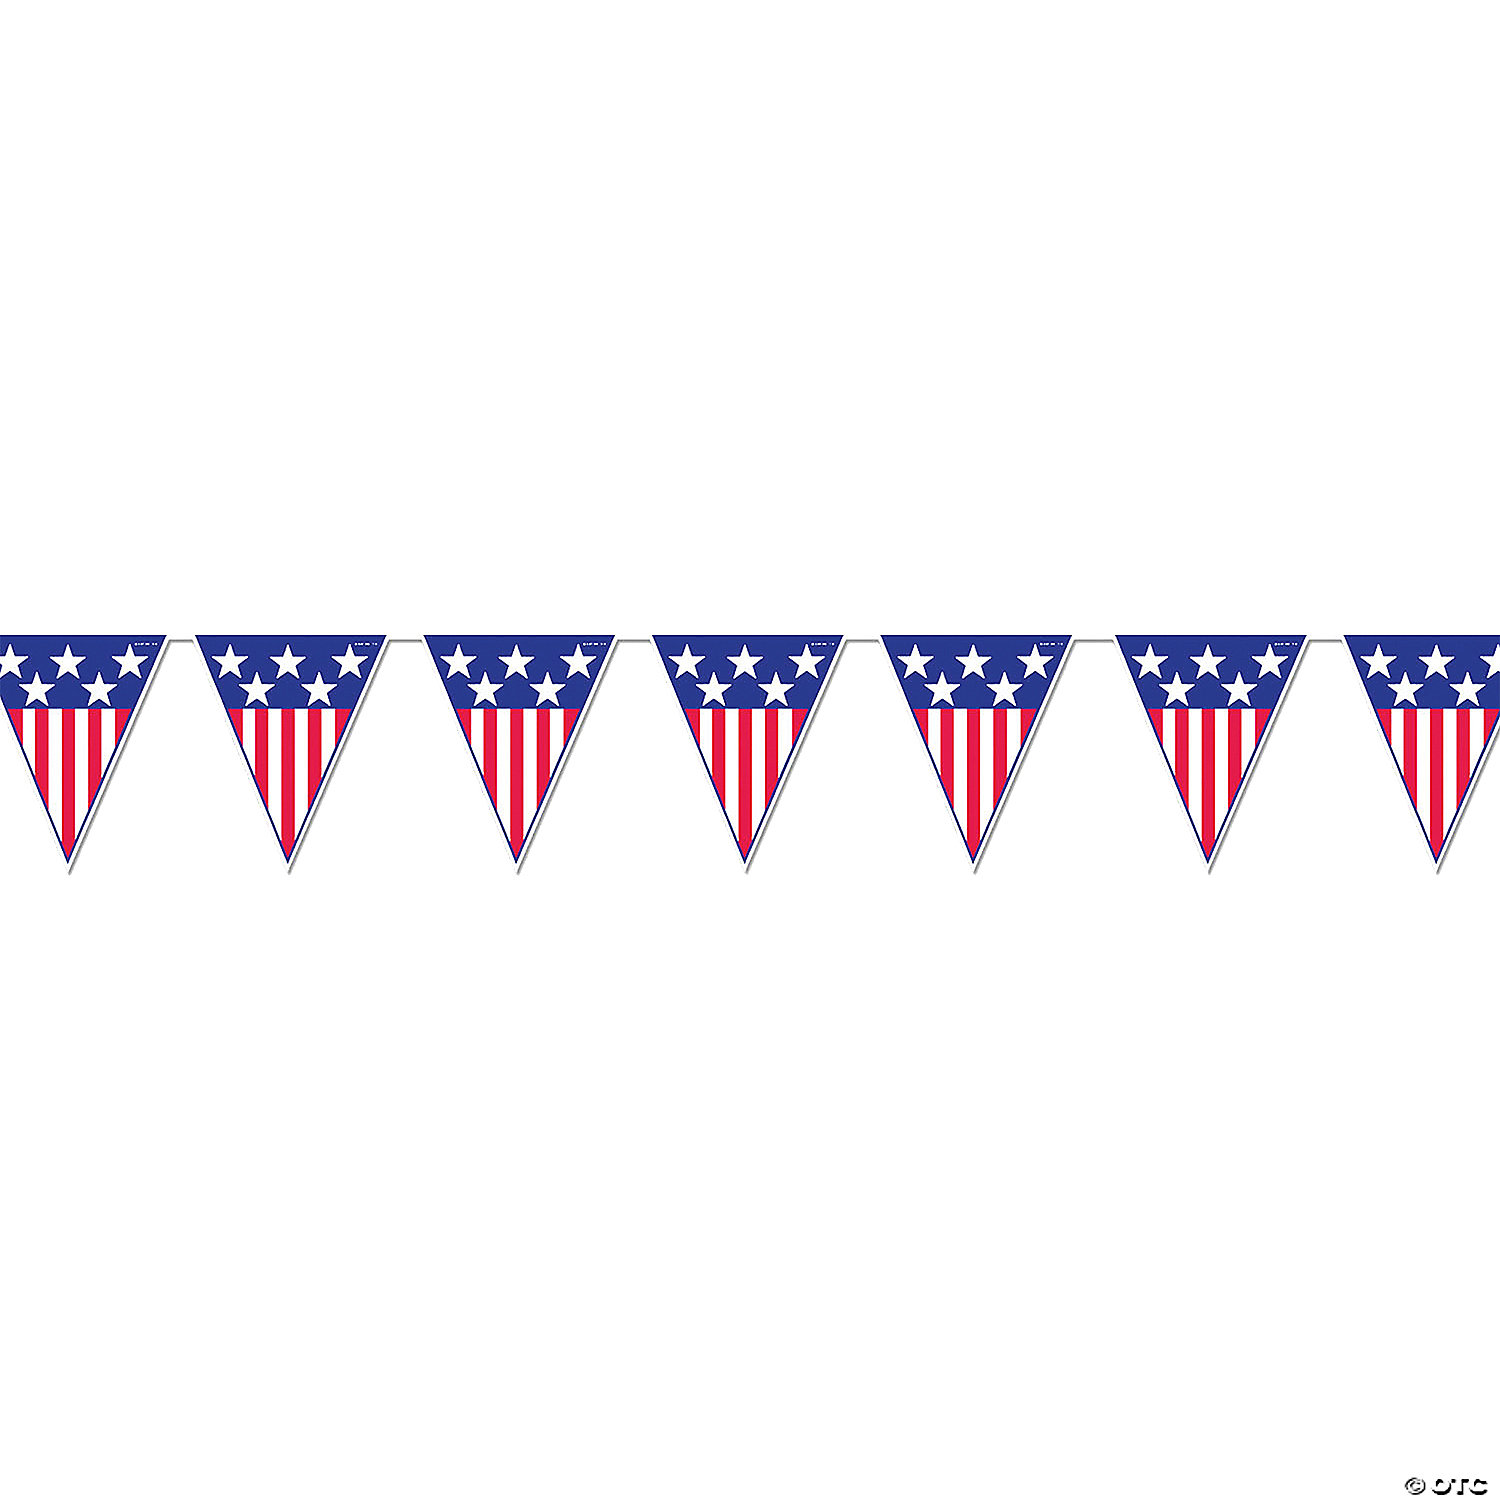 USA PENNANT BANNER - FOURTH OF JULY